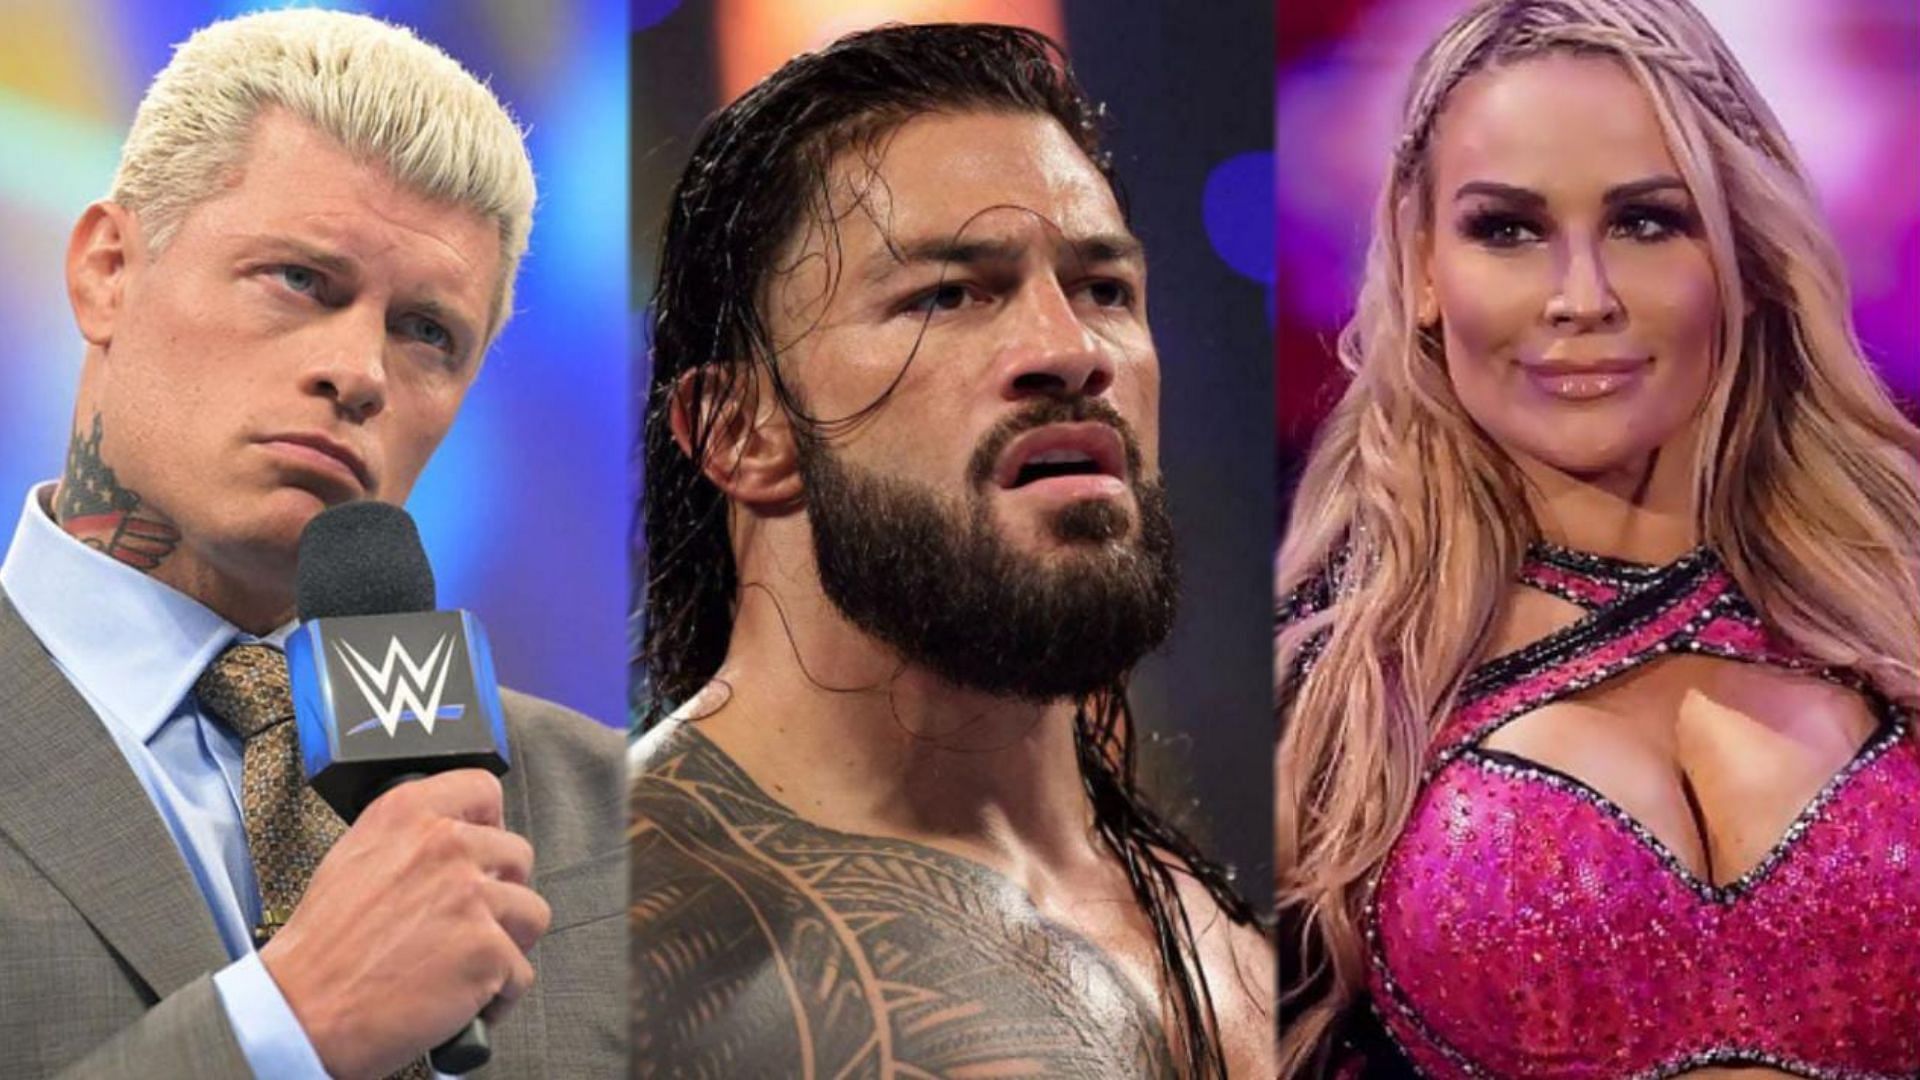 WWE Superstars have crossed with AEW stars on numerous occasions this week.